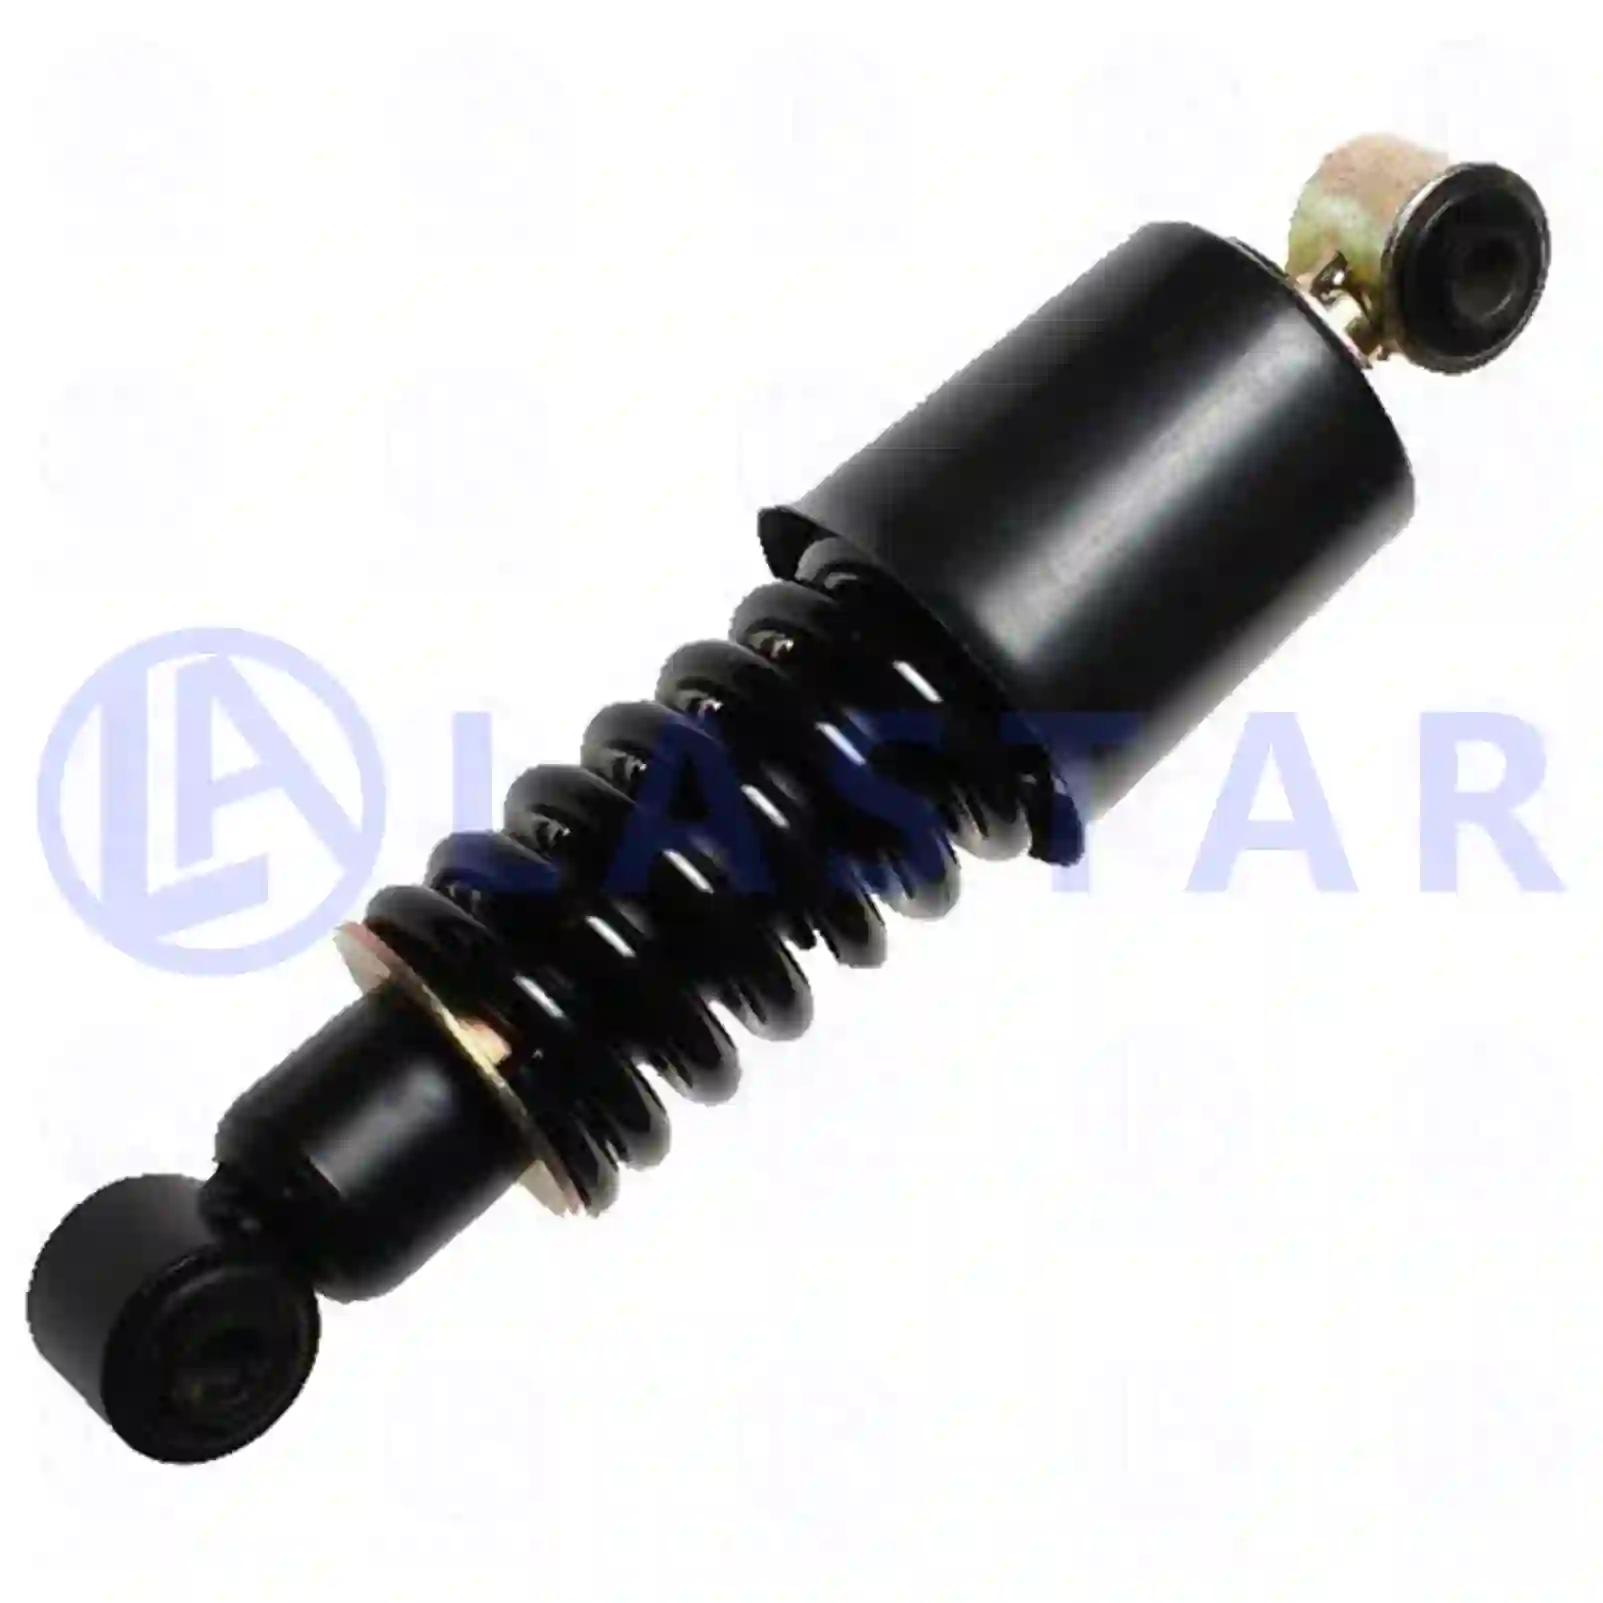 Cabin shock absorber, 77734850, 9428901019, 9428901619, 9428901719, 9428904019, 9438901019, 9438901619, 9438901719 ||  77734850 Lastar Spare Part | Truck Spare Parts, Auotomotive Spare Parts Cabin shock absorber, 77734850, 9428901019, 9428901619, 9428901719, 9428904019, 9438901019, 9438901619, 9438901719 ||  77734850 Lastar Spare Part | Truck Spare Parts, Auotomotive Spare Parts